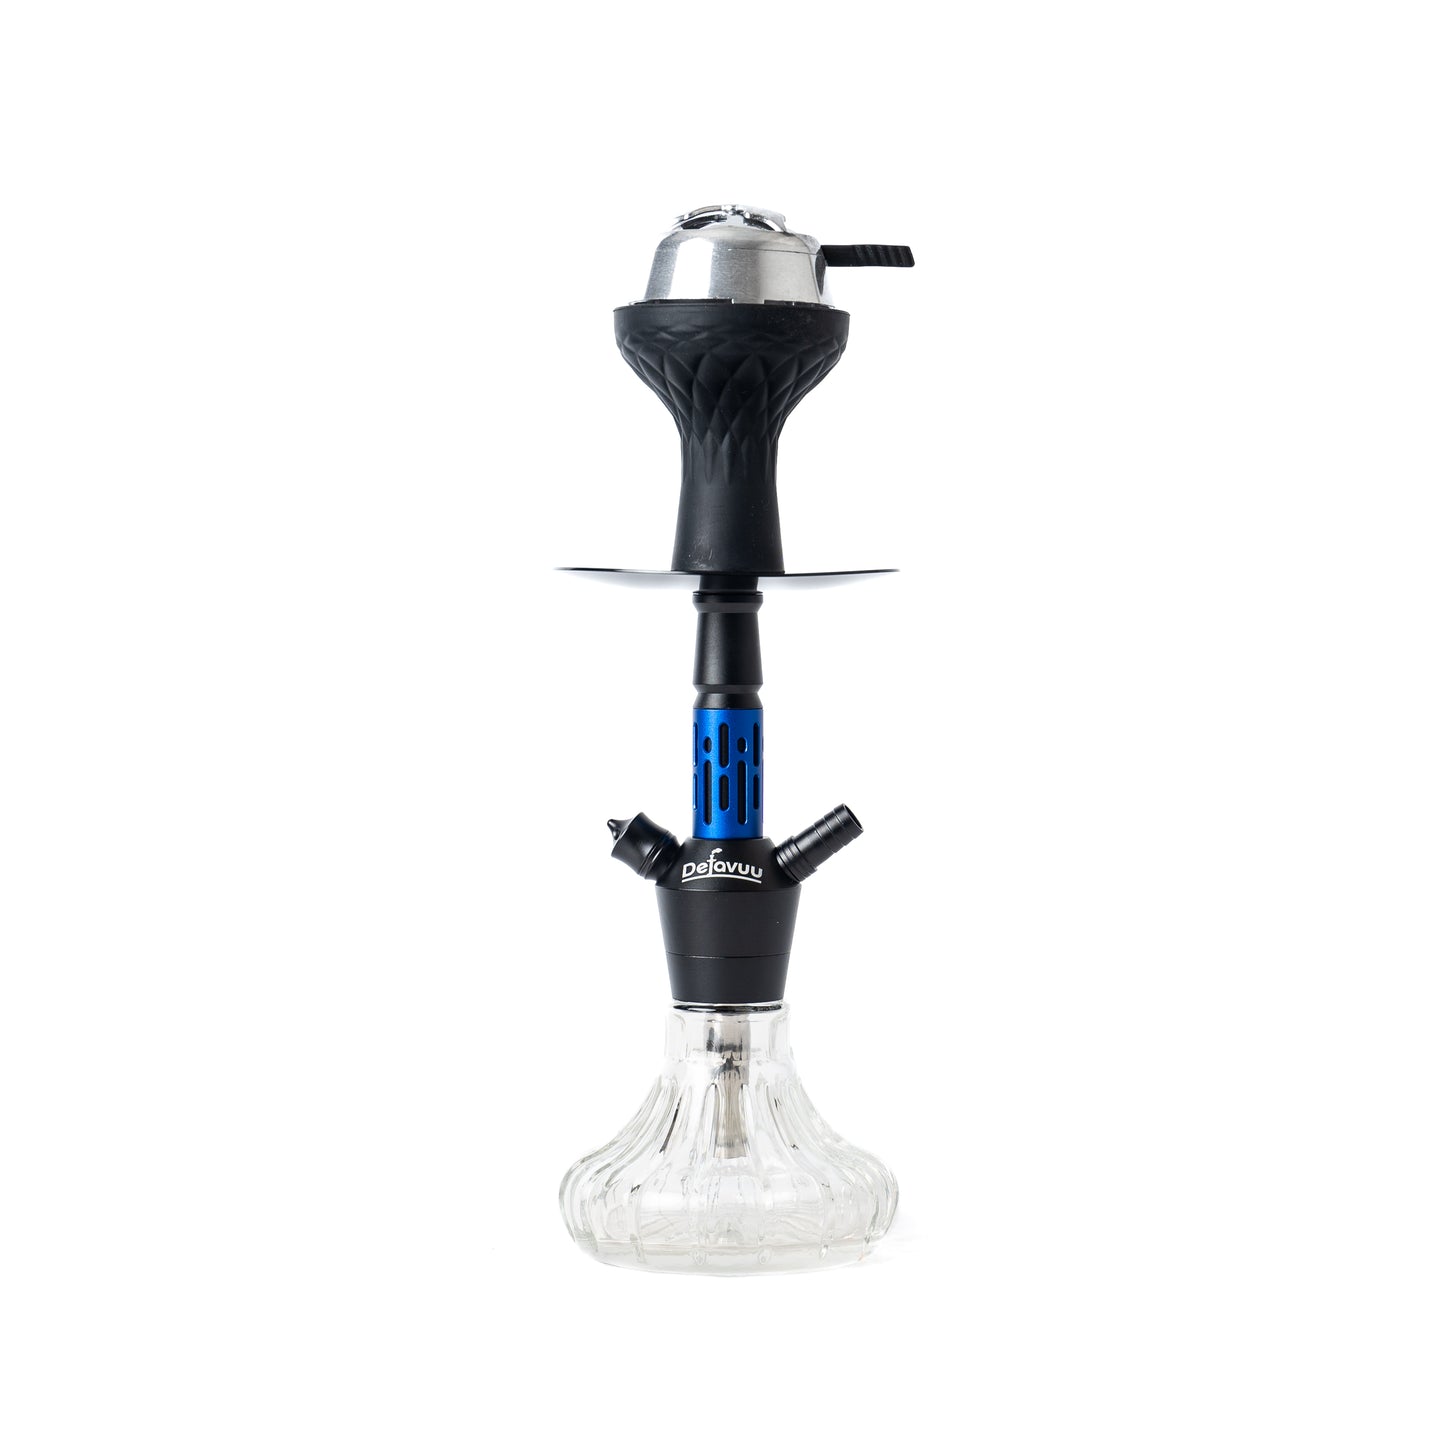 Tuffy Hookah with Travel Bag - Blue